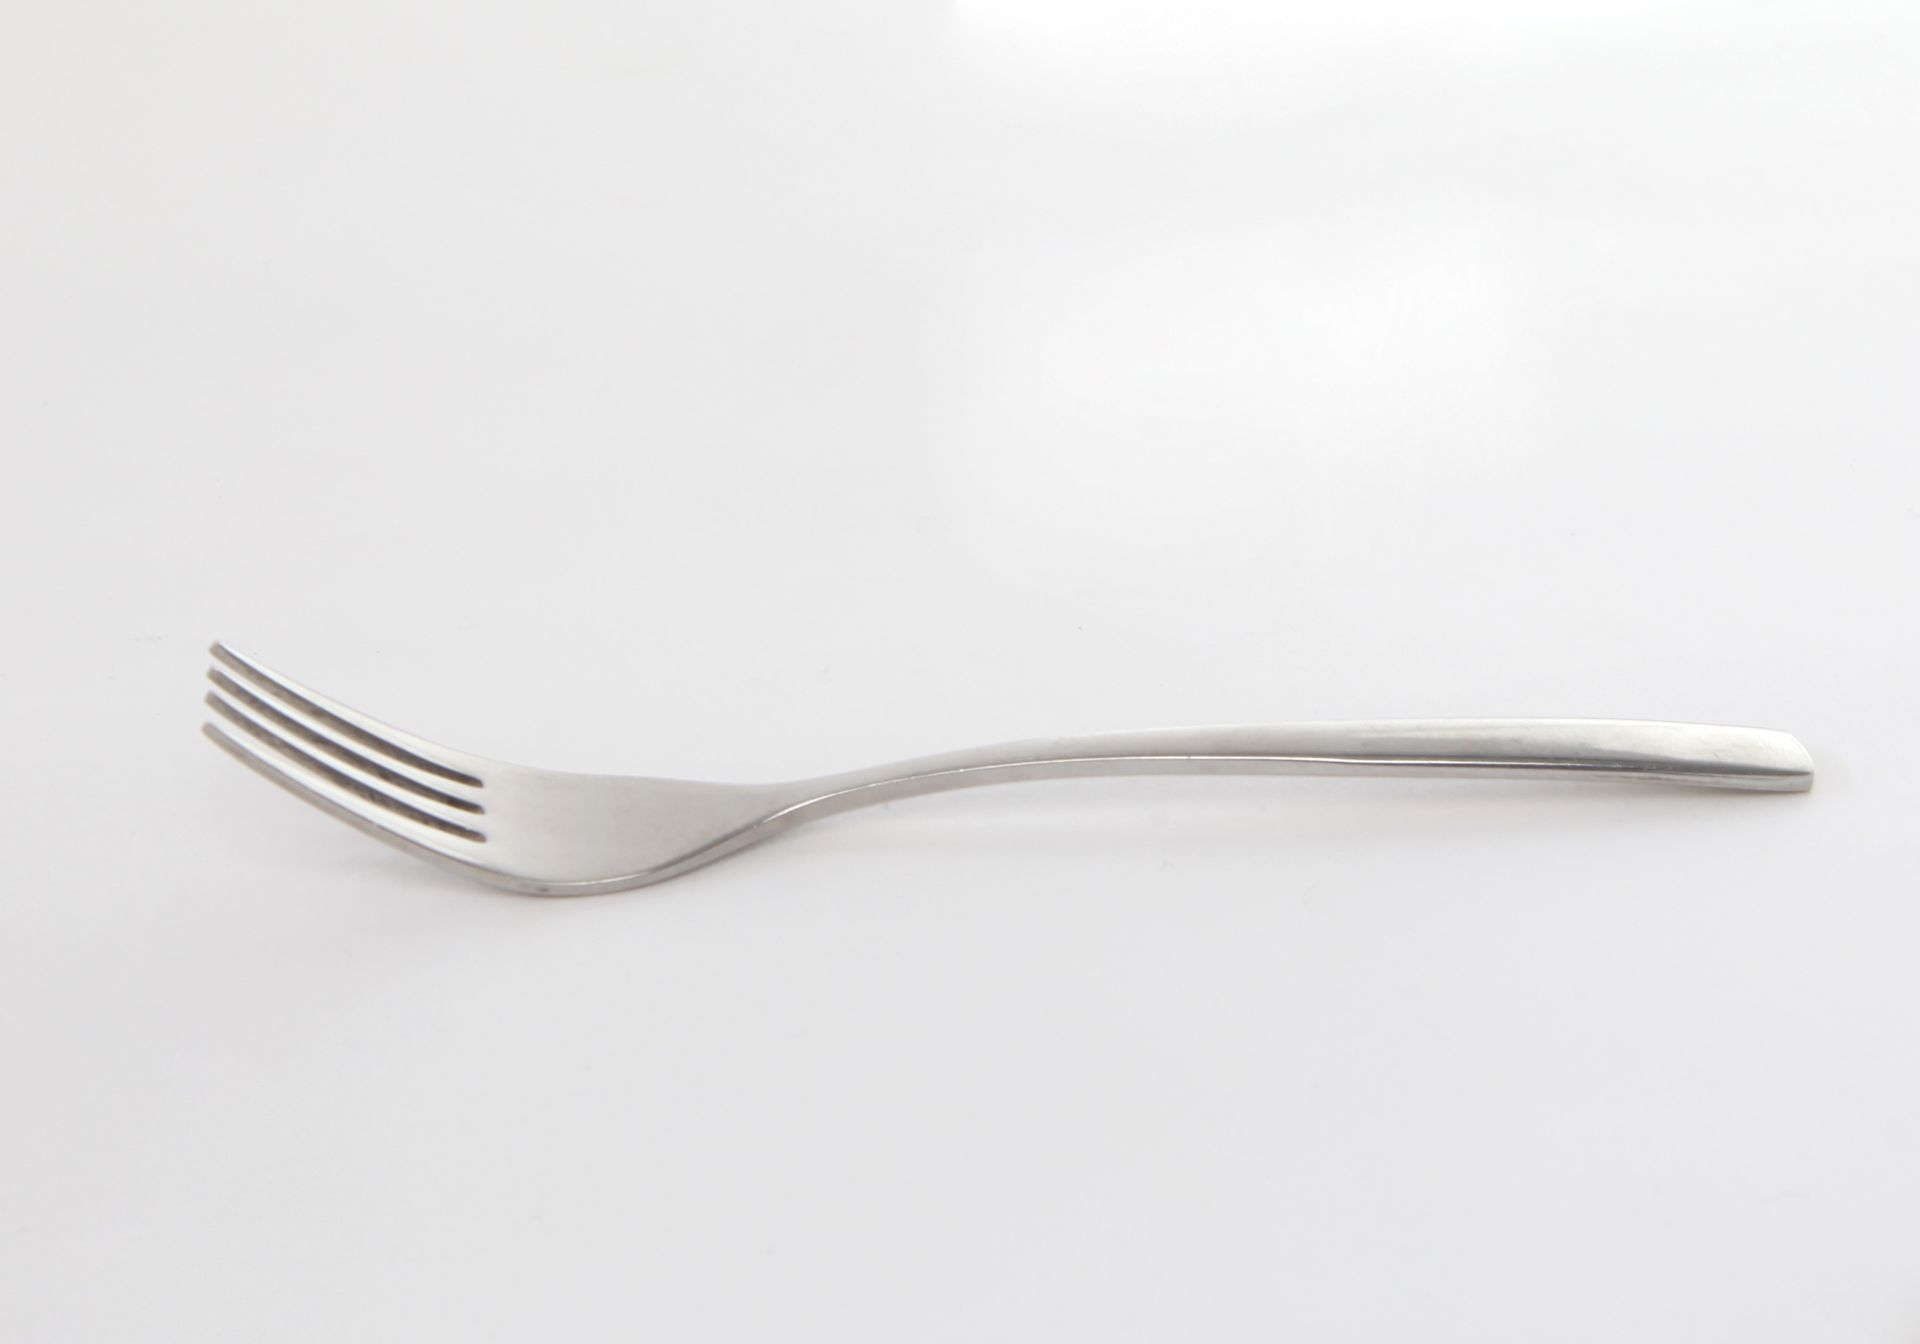 * European made, Comas, Barcelona range, 18/10 Stainless steel, 100 x large fork, small fork - Colle